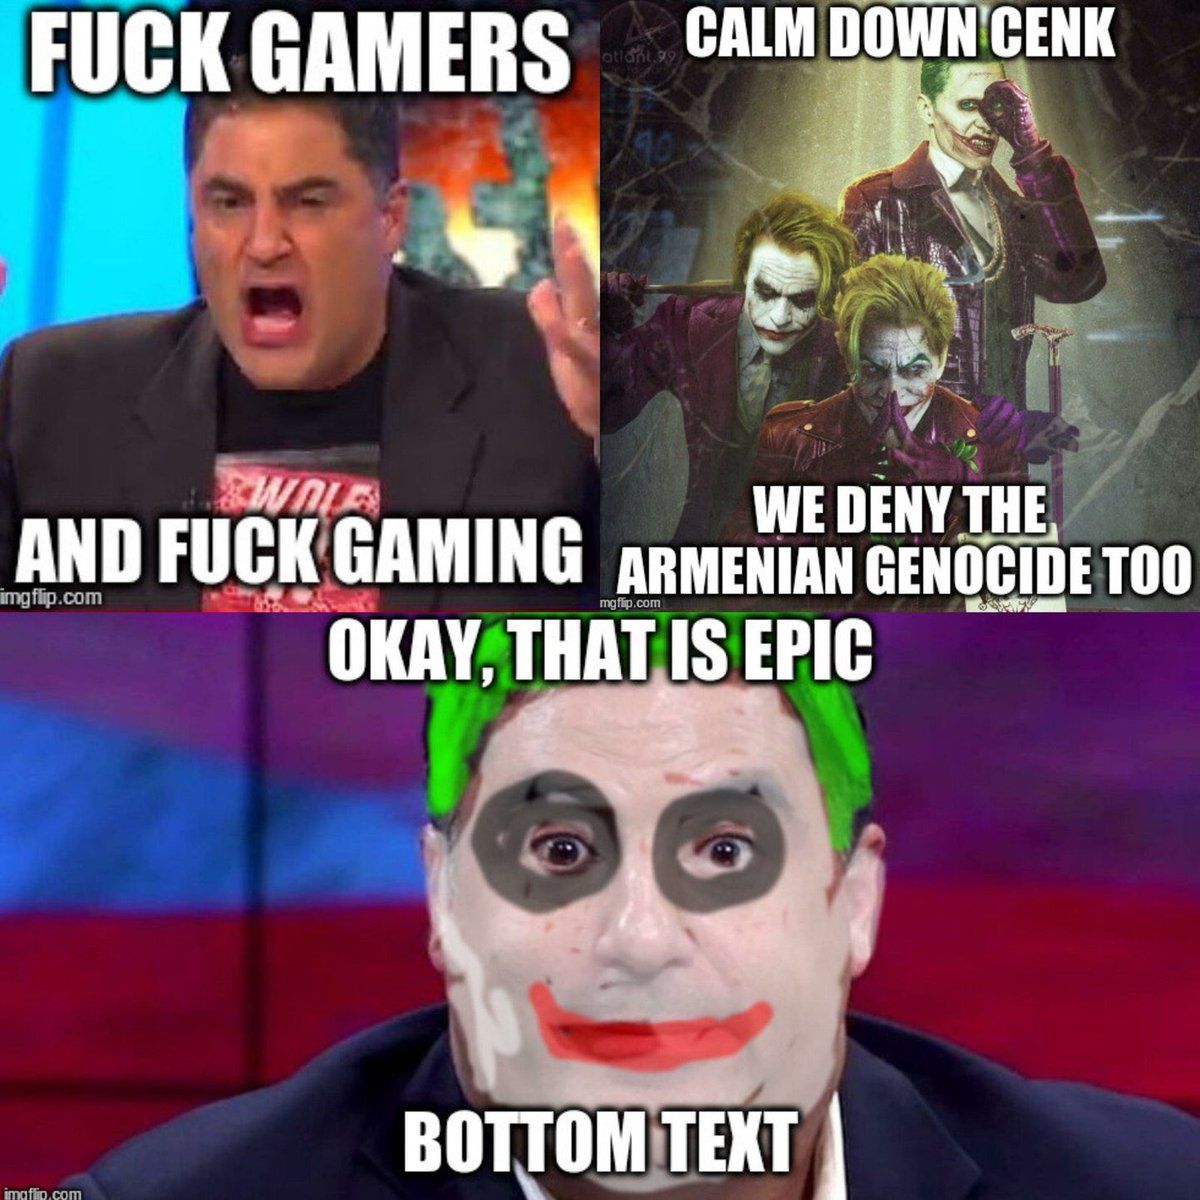 Welcome to the gaming community, Cenk